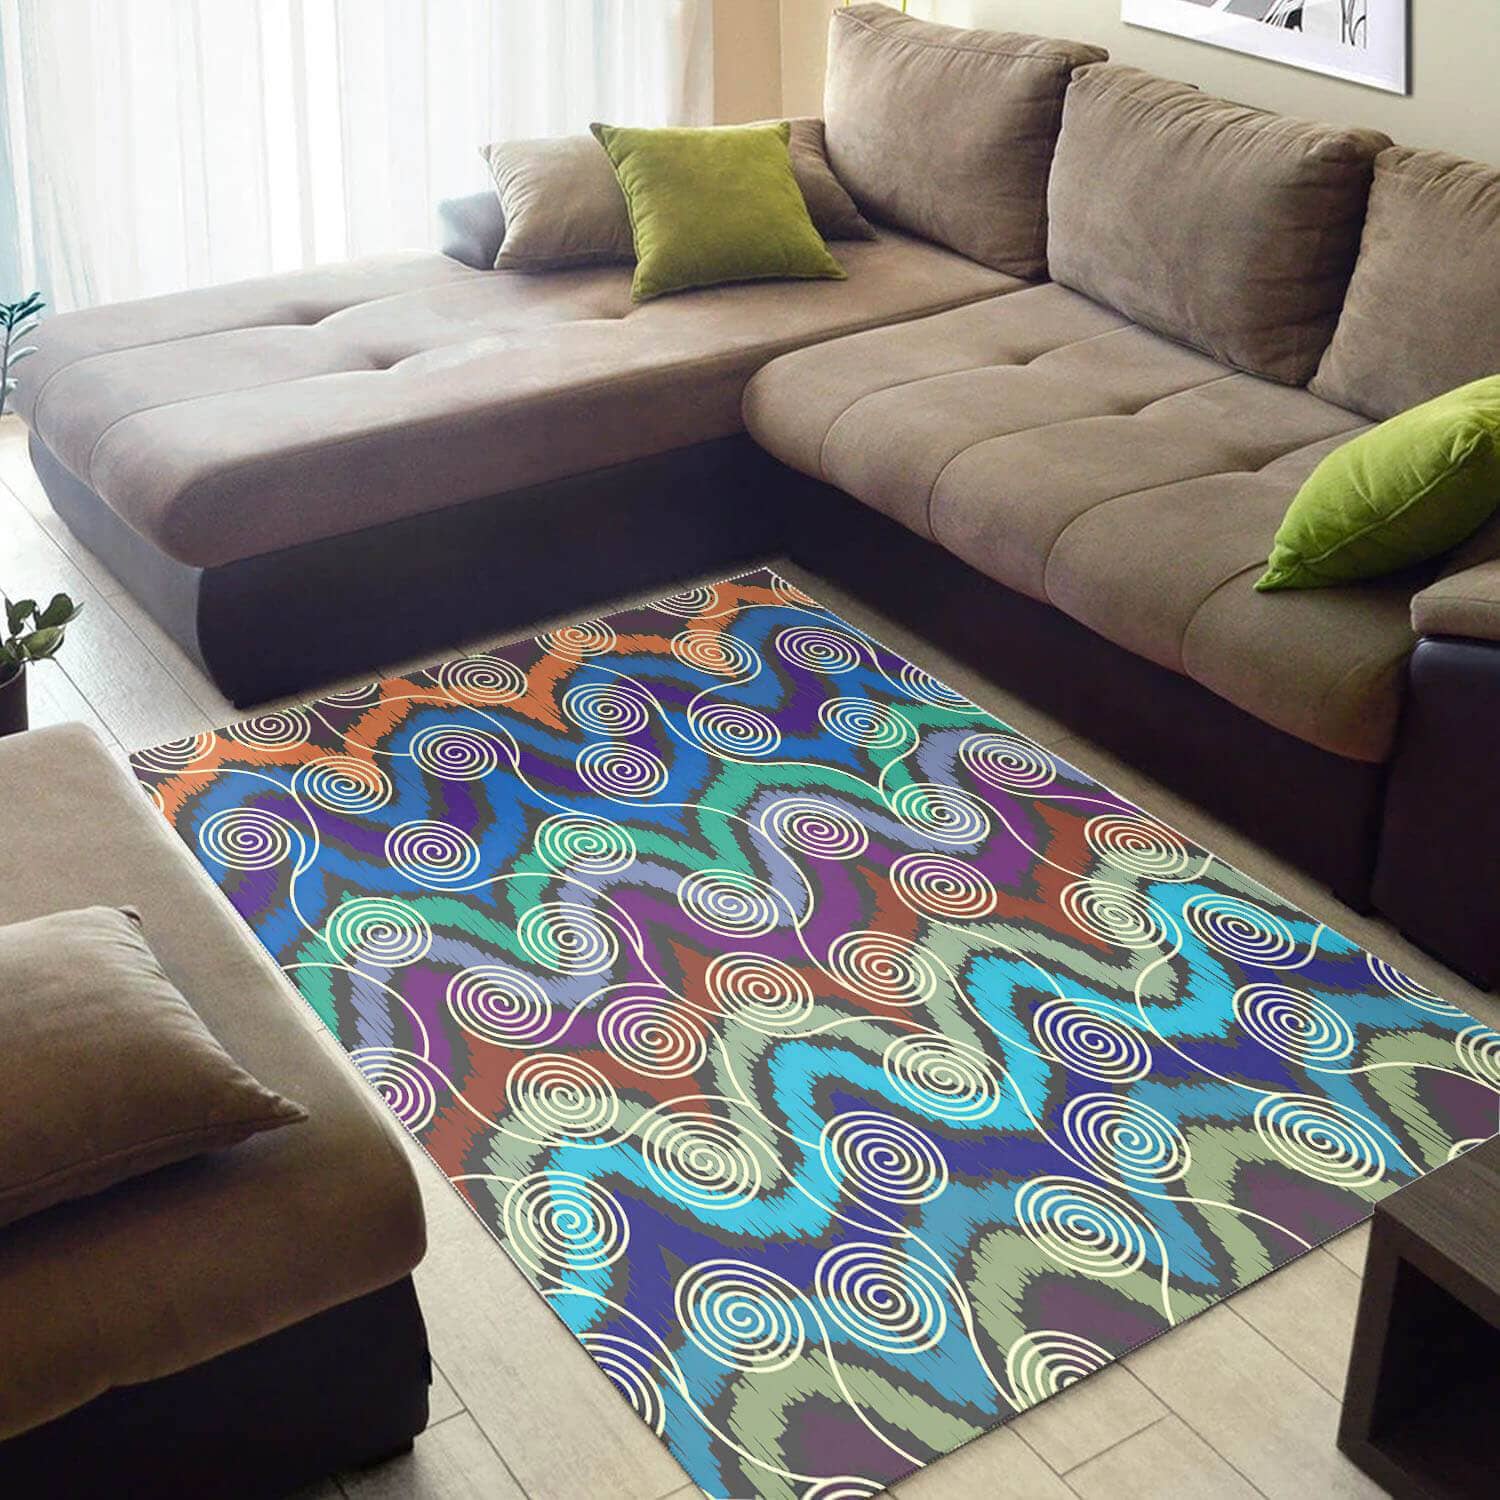 Beautiful African Style Retro Ethnic Seamless Pattern Carpet Living Room Rug